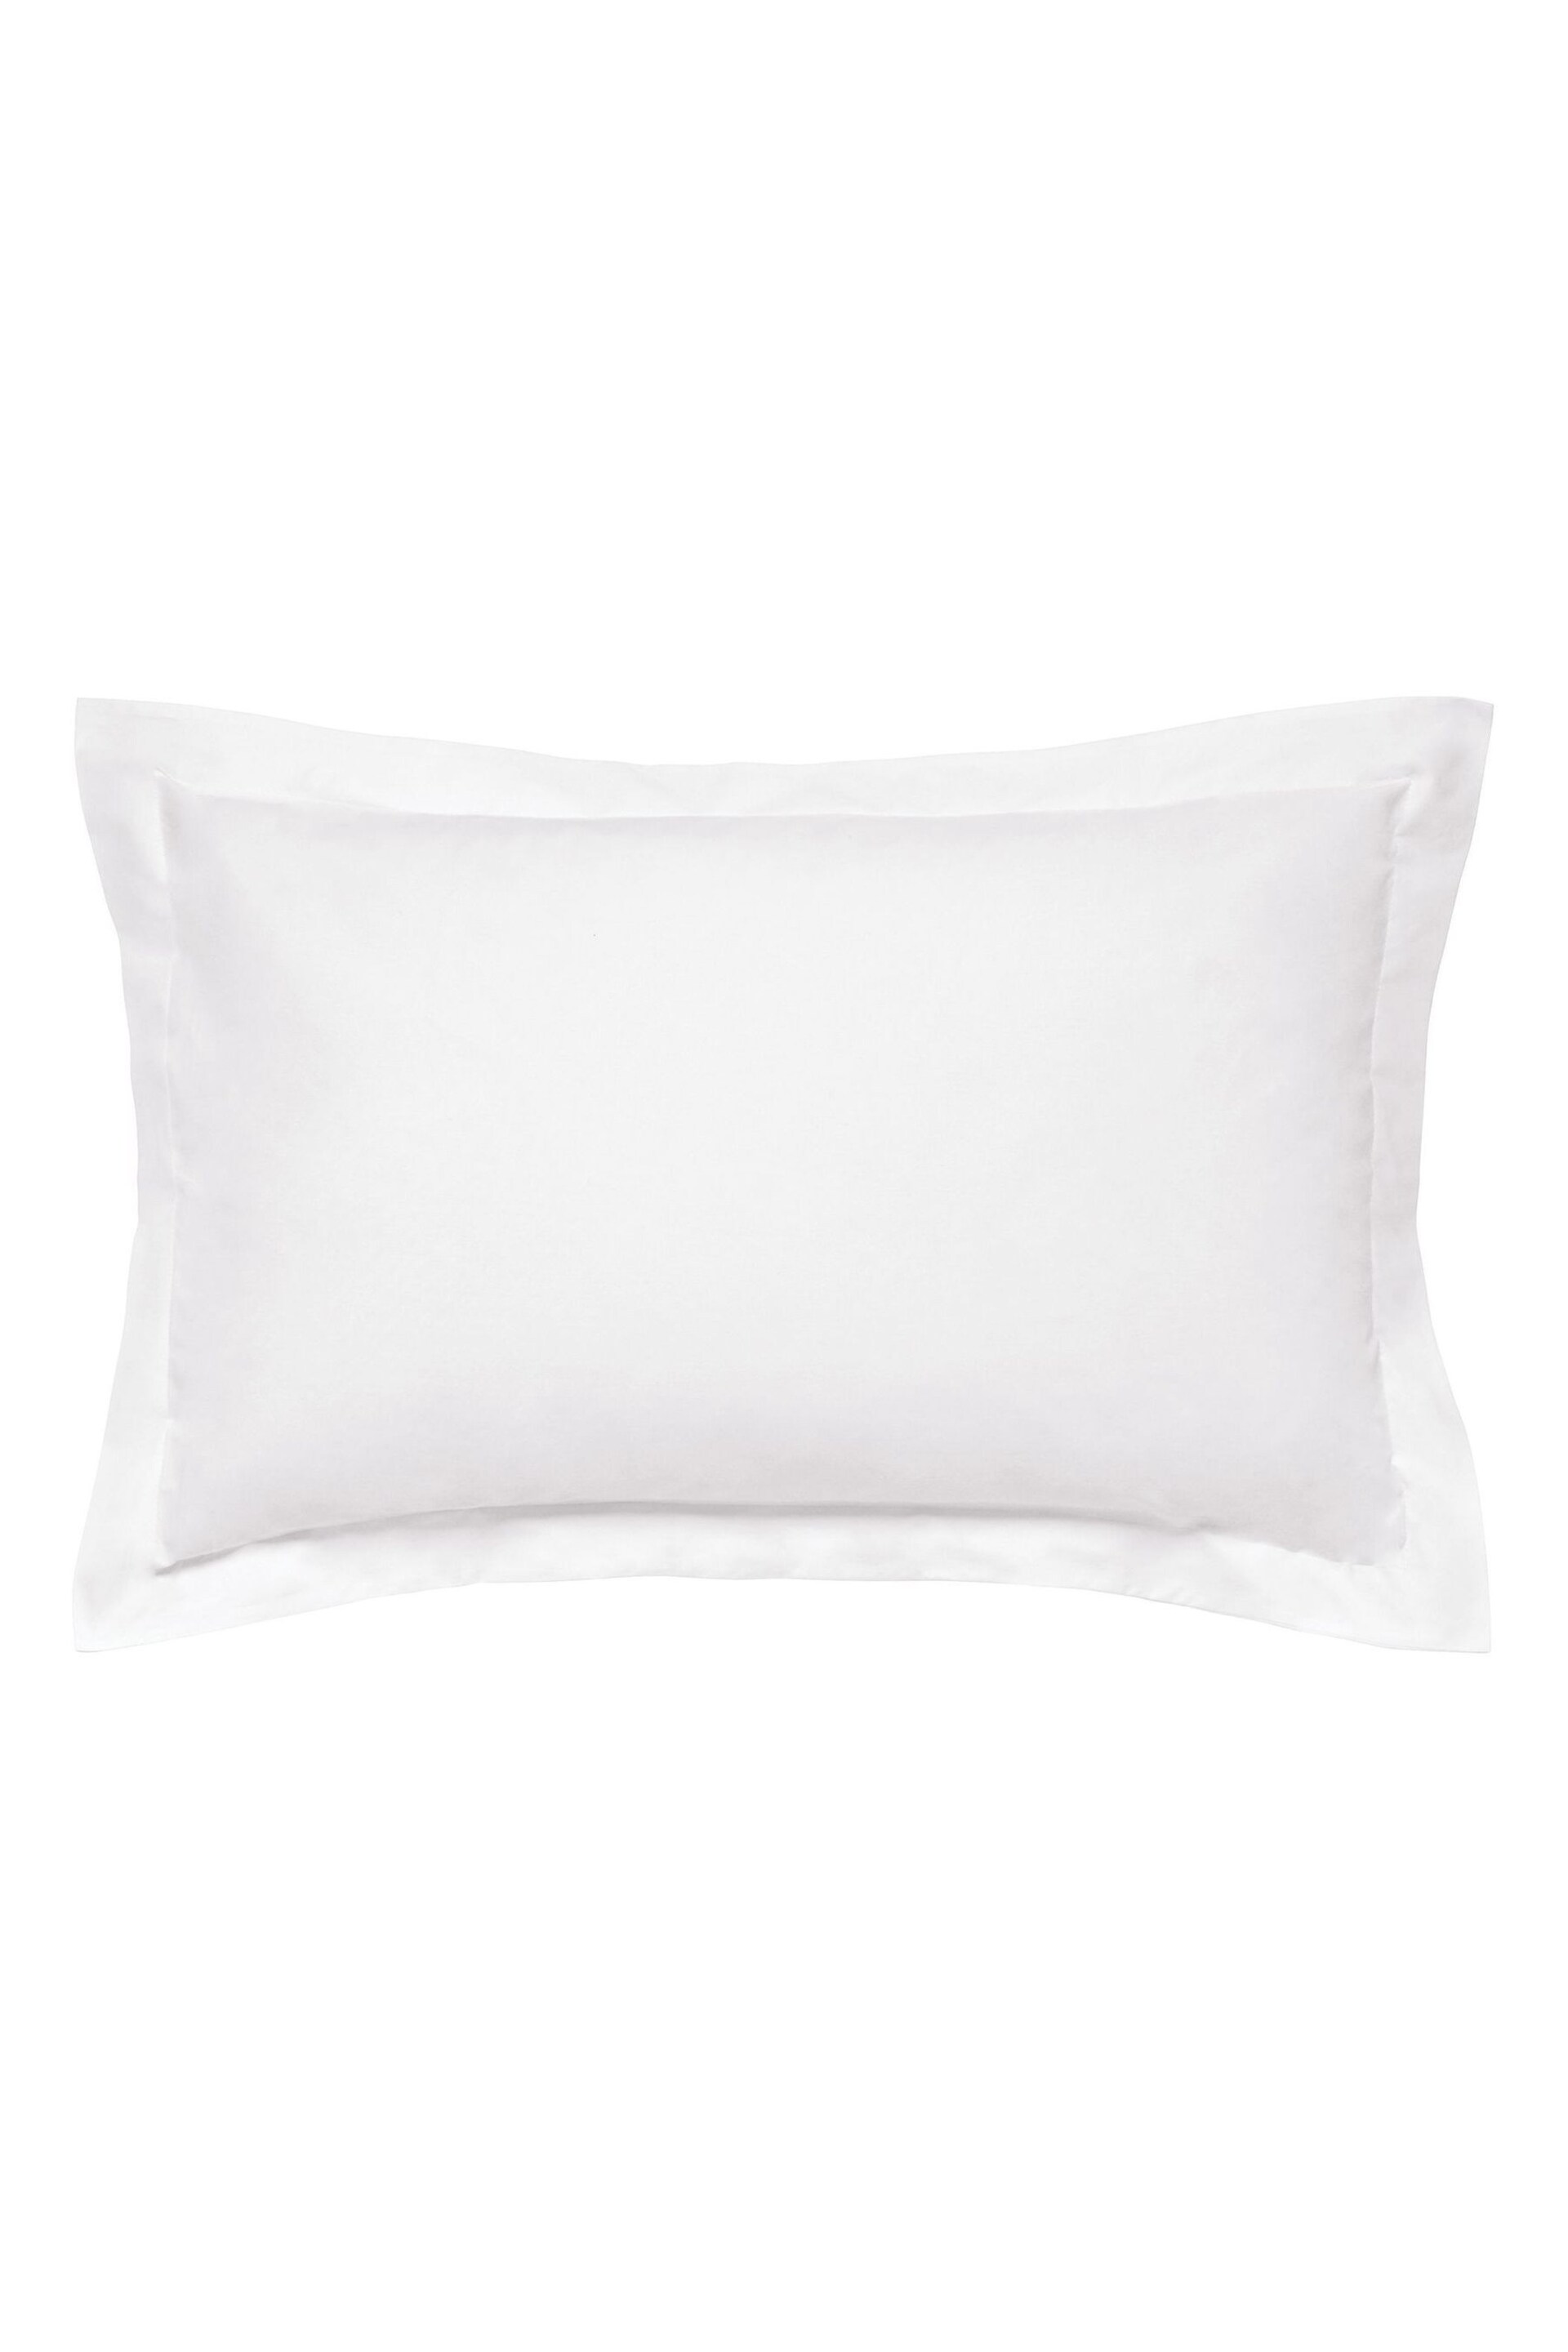 Bedeck of Belfast White 300 Thread Count Egyptian Cotton Oxford Pillowcase - Image 2 of 2